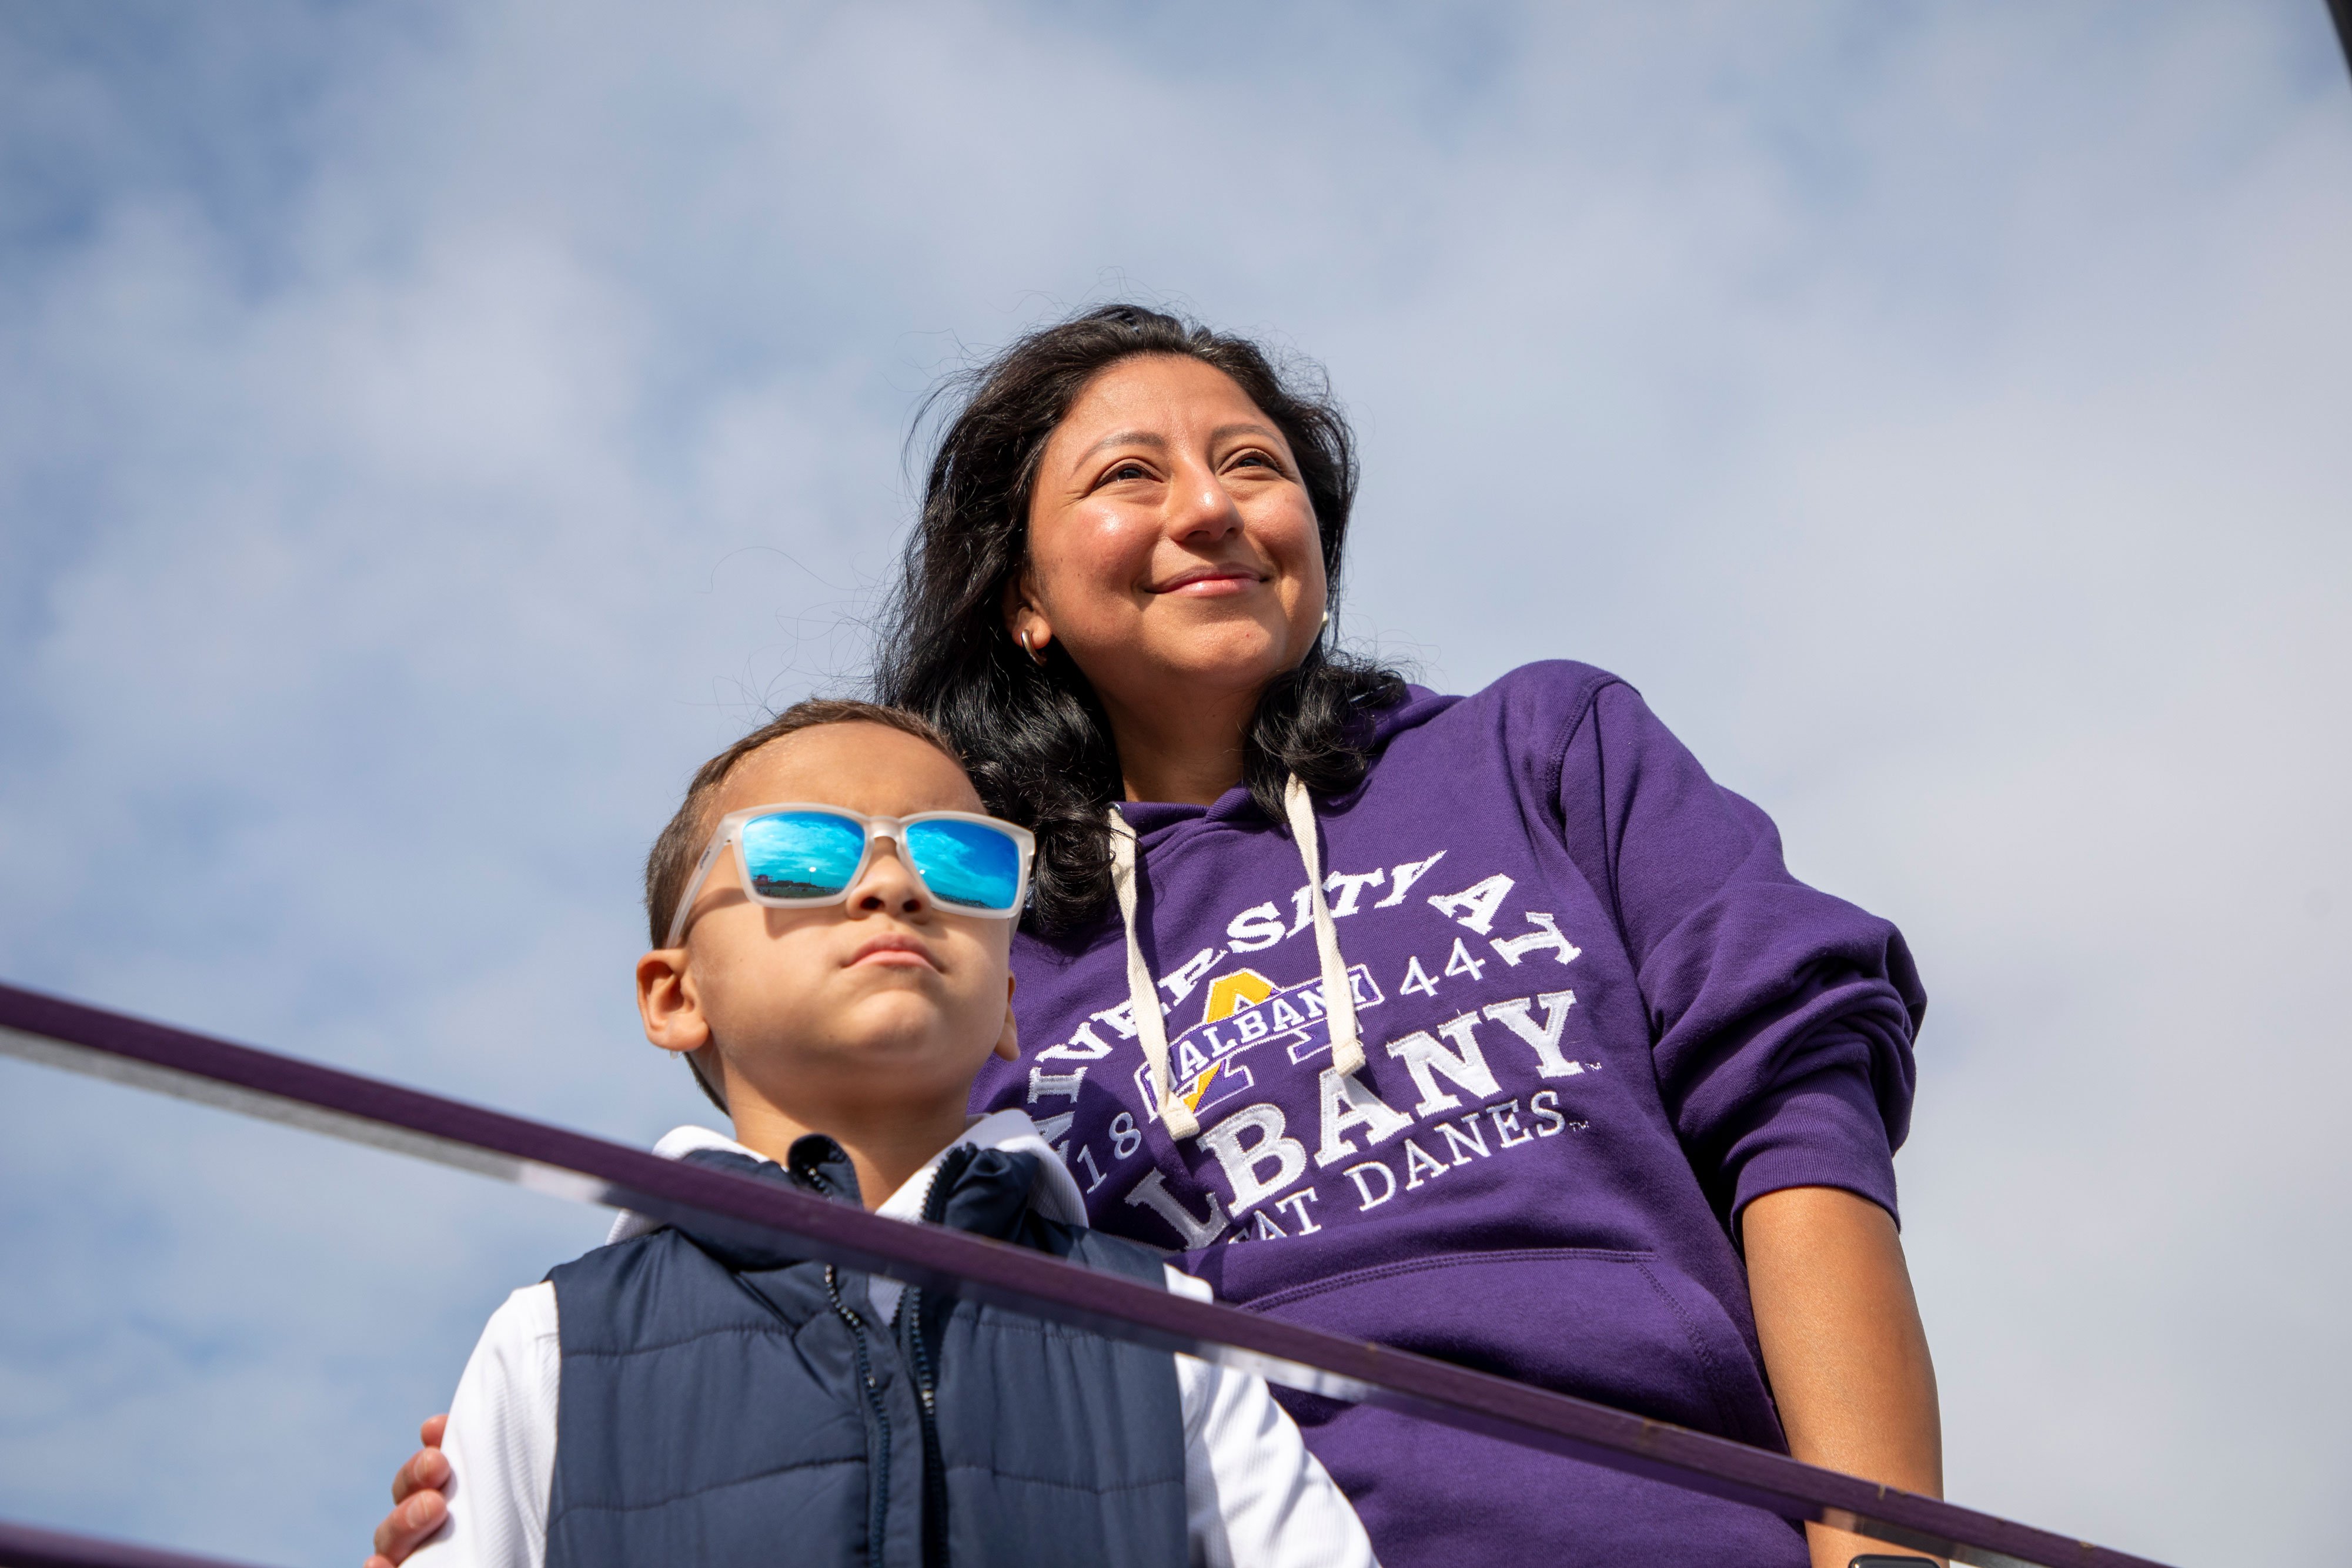 An adult in a UAlbany sweatshirt and a child wearing sunglasses smile as they pose for a photo.